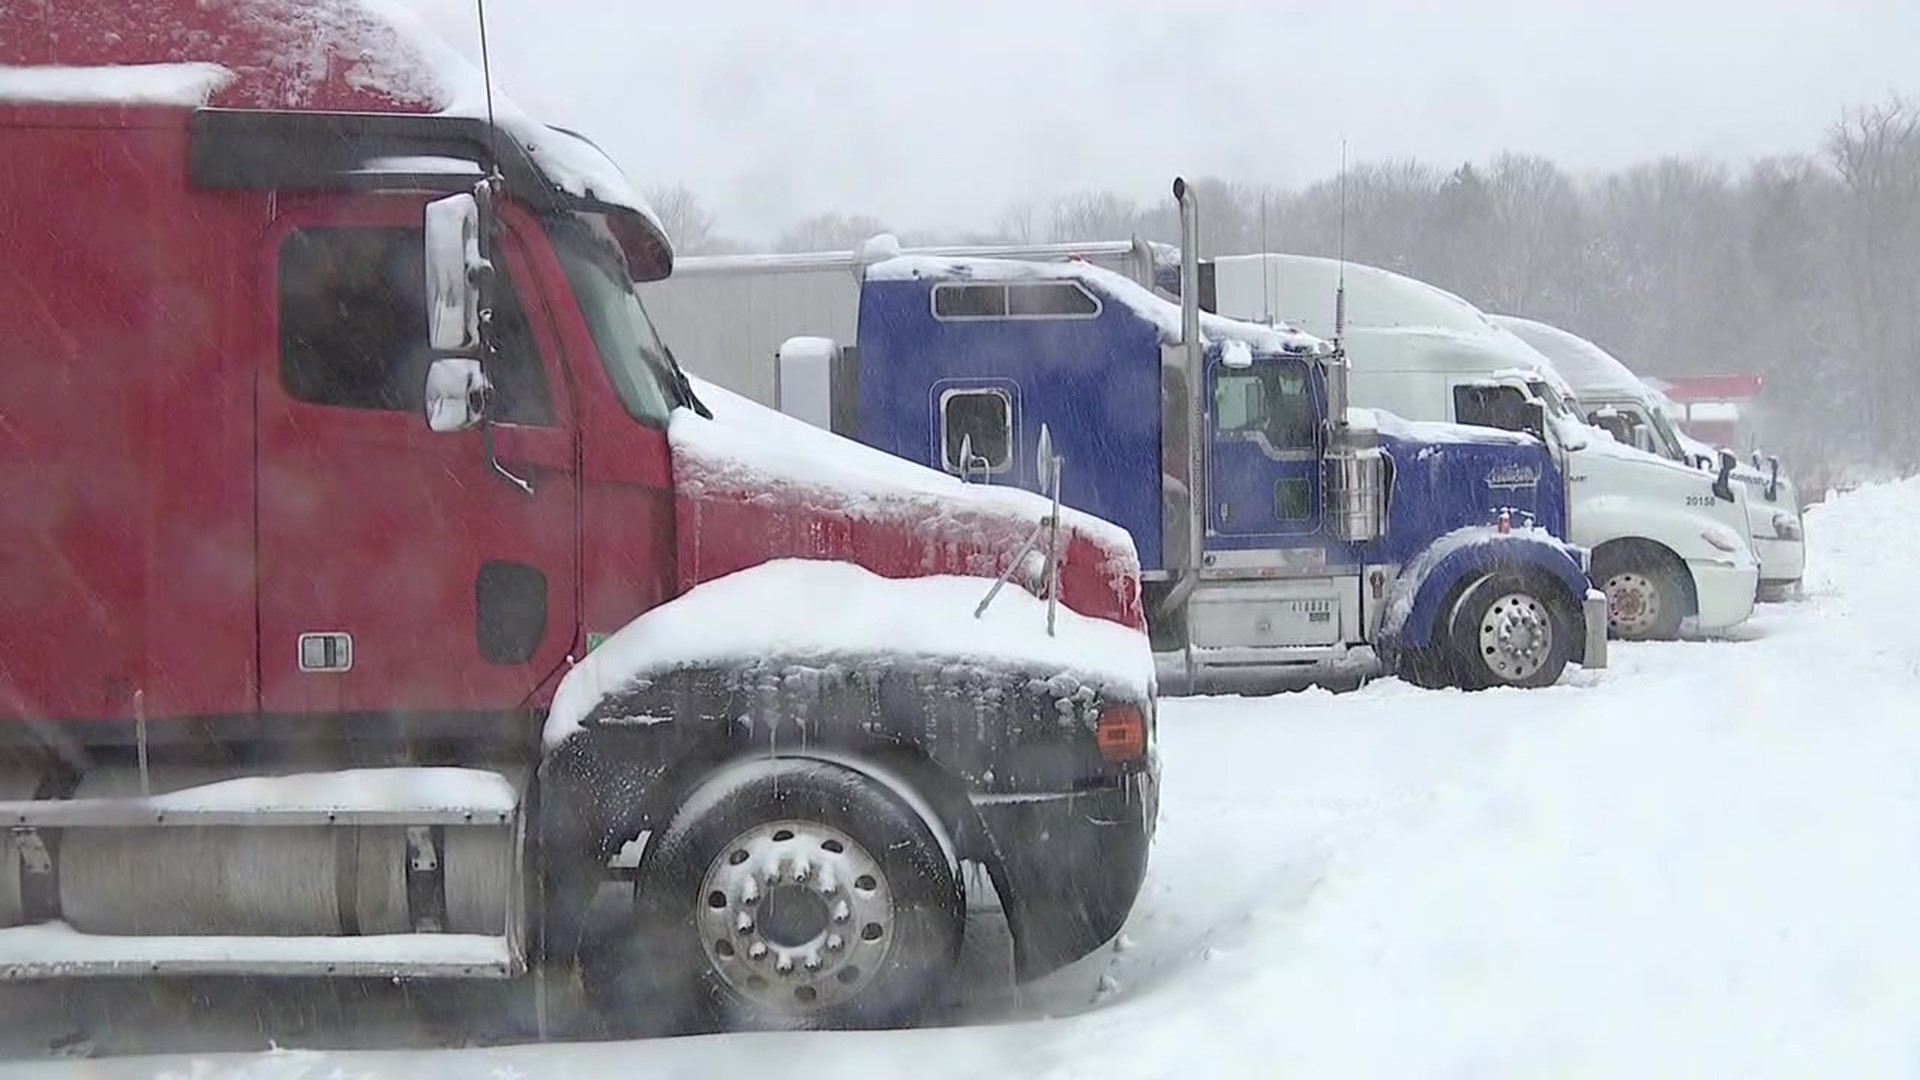 PennDOT has been enforcing tractor-trailer bans on interstates during major snowstorms for the last few years, and the restrictions seem to be working.